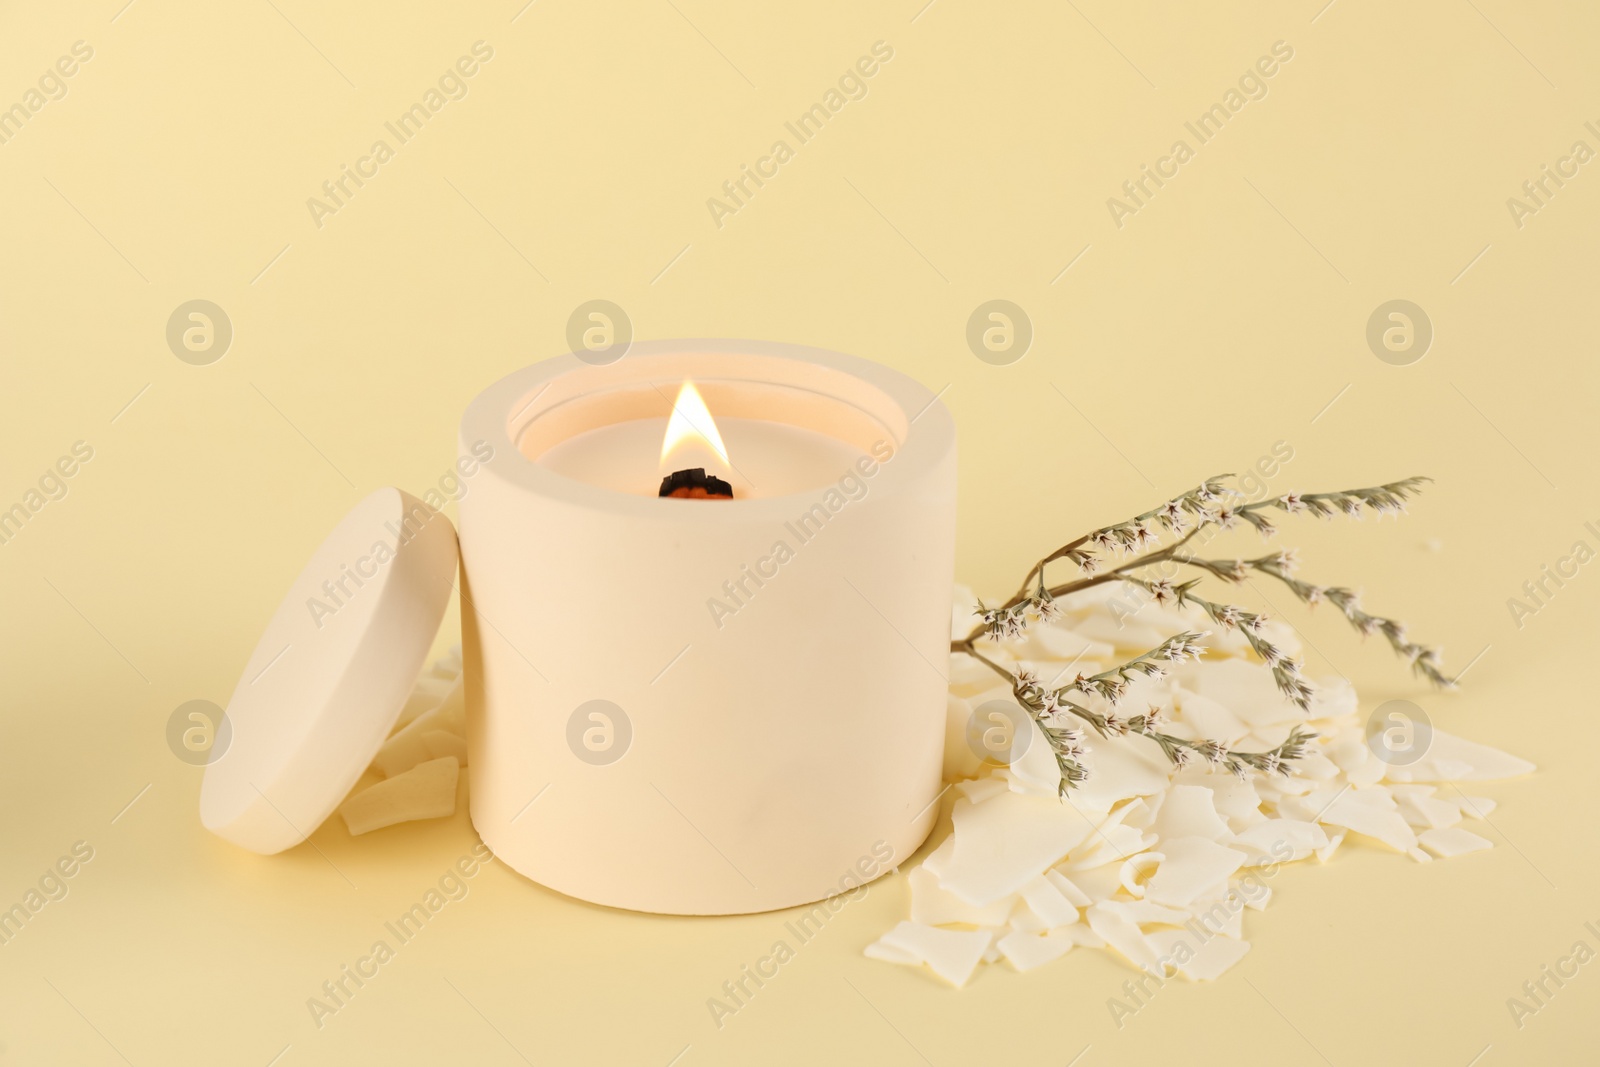 Photo of Burning soy candle, wax flakes and statice twig on beige background